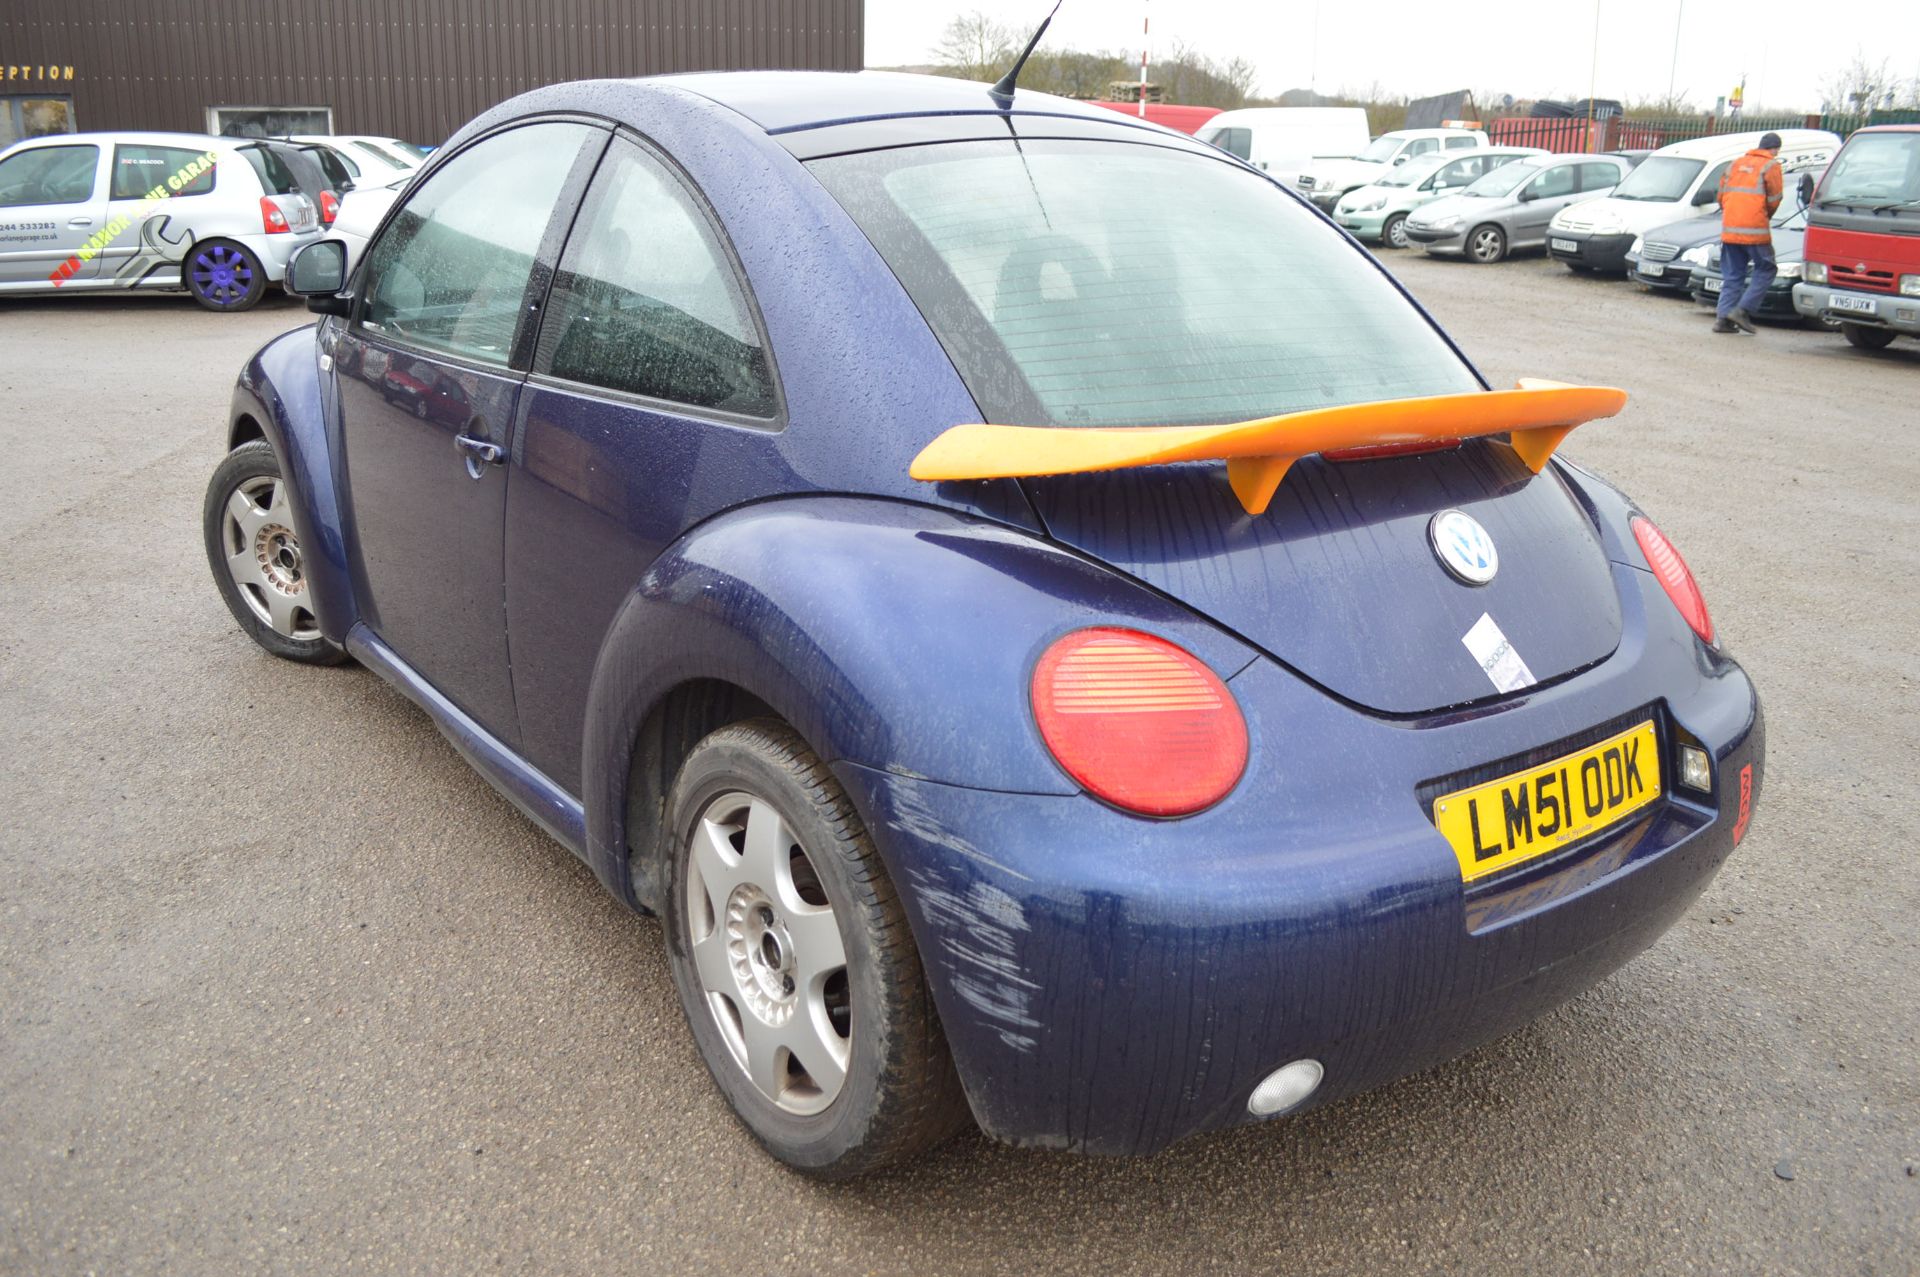 2001/51 REG VOLKSWAGEN BEETLE TURBO 1.8 TRACK CAR 5 SPEED MANUAL GOOD STRONG ENGINE AND BOX HAS JUST - Image 4 of 16